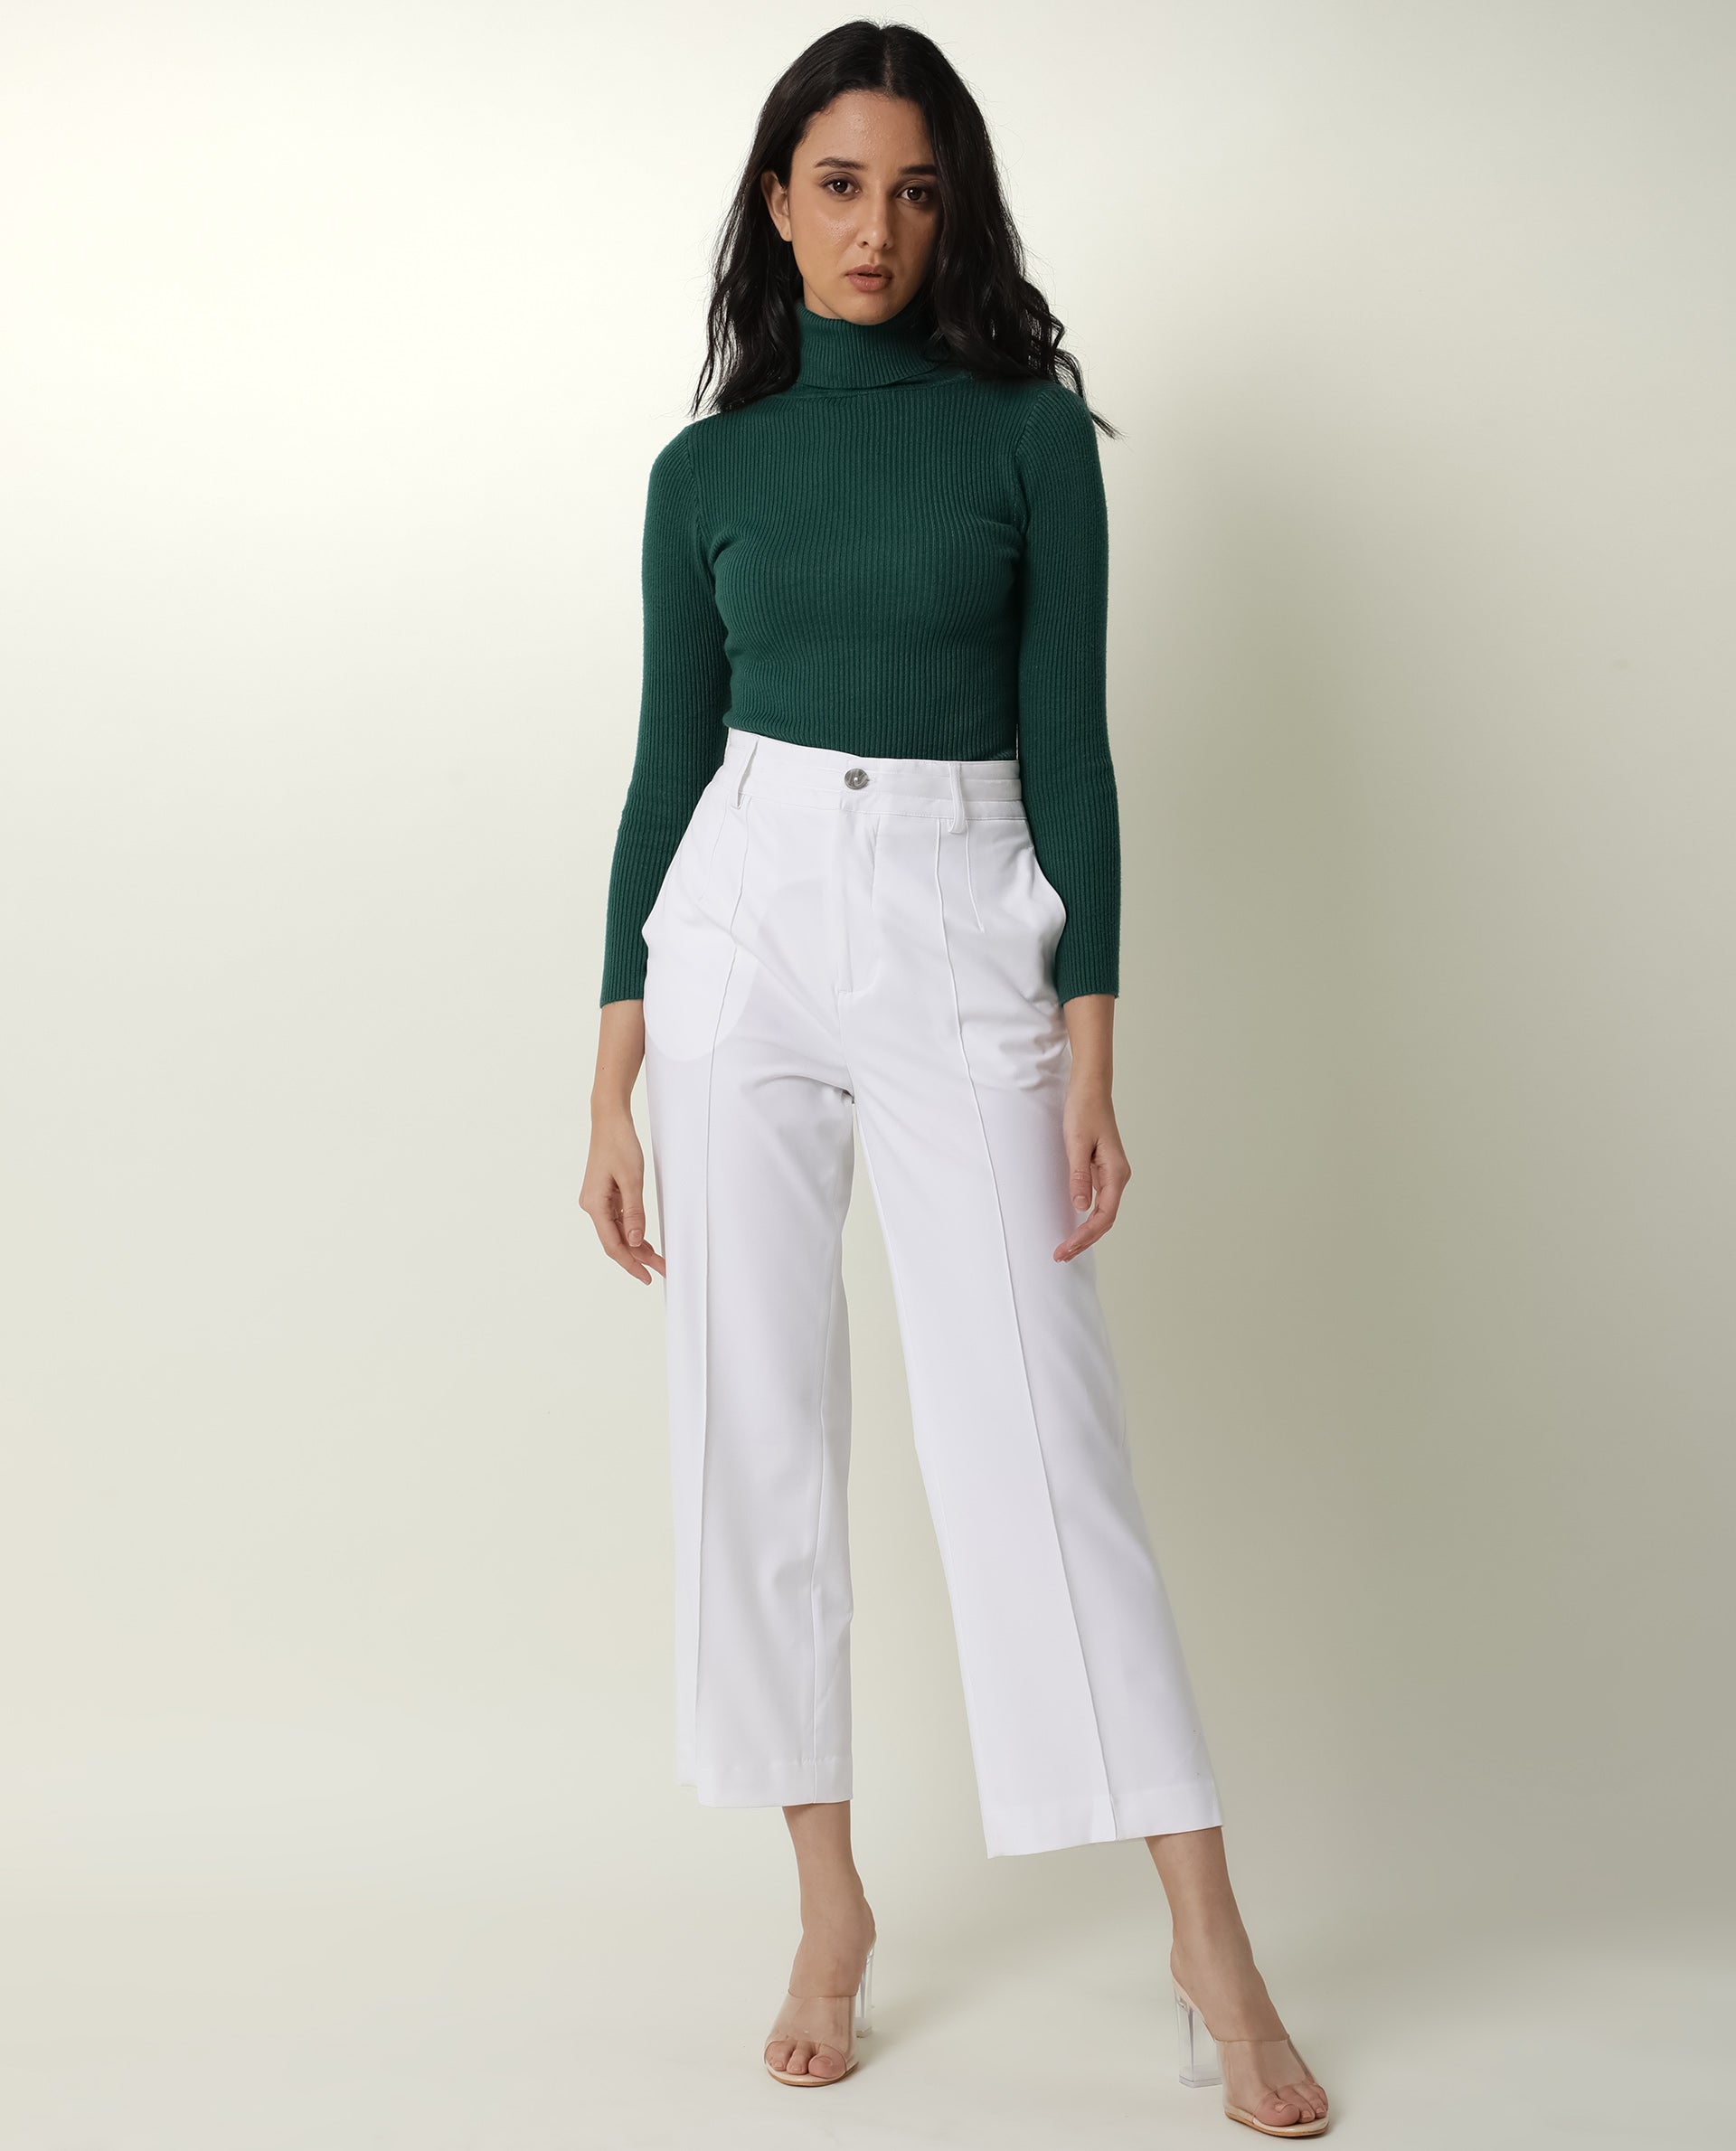 WOMENS MALLINDA WHITE TROUSER Polycotton Lycra FABRIC Tailored FIT Button CLOSURE High Rise WAIST RISE Ankle Length